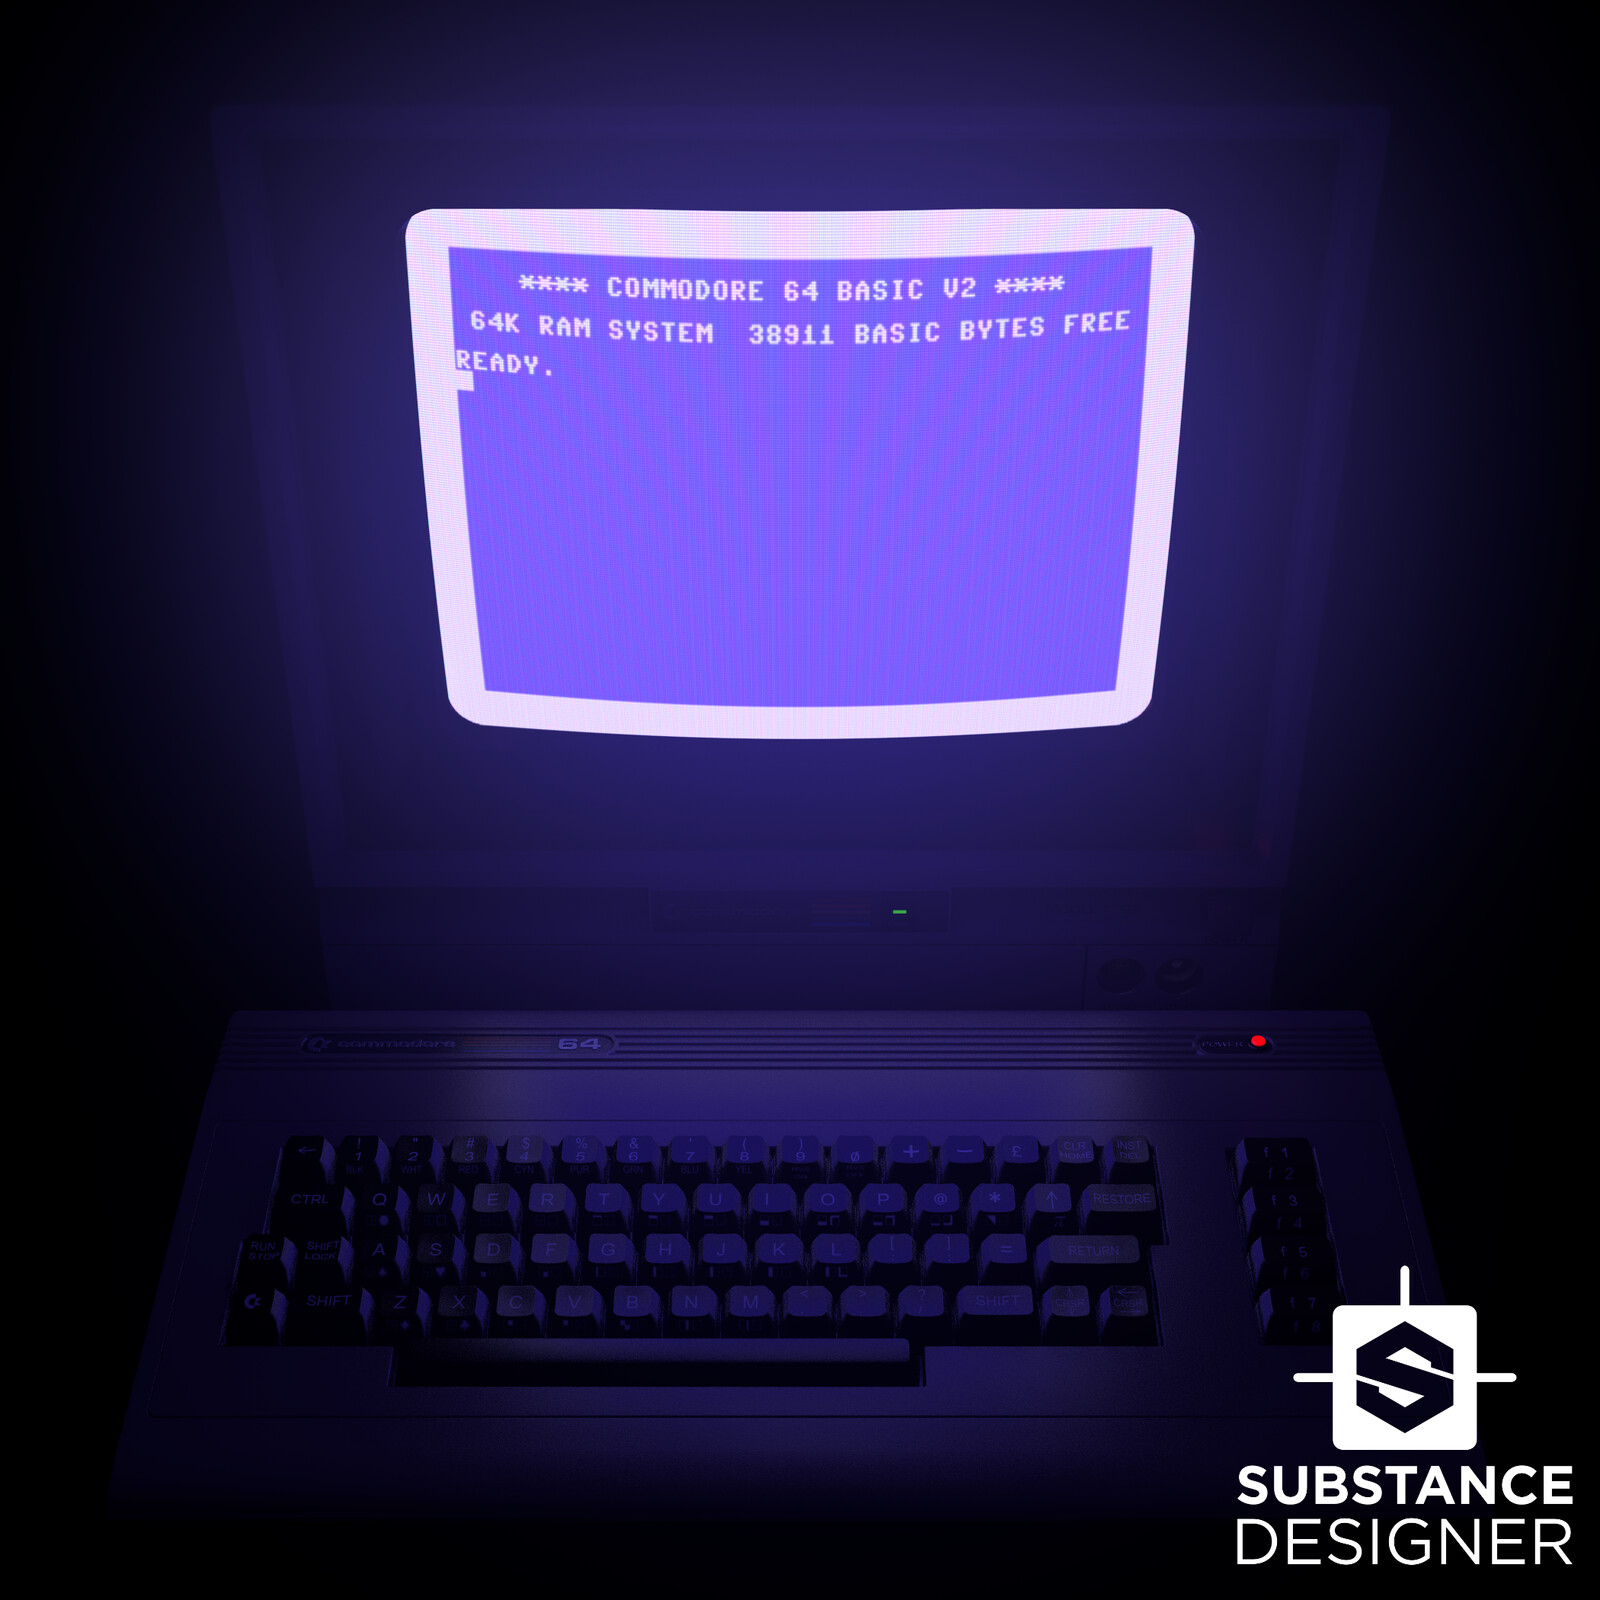 Substance Designer - Fully Procedural Commodore 1702